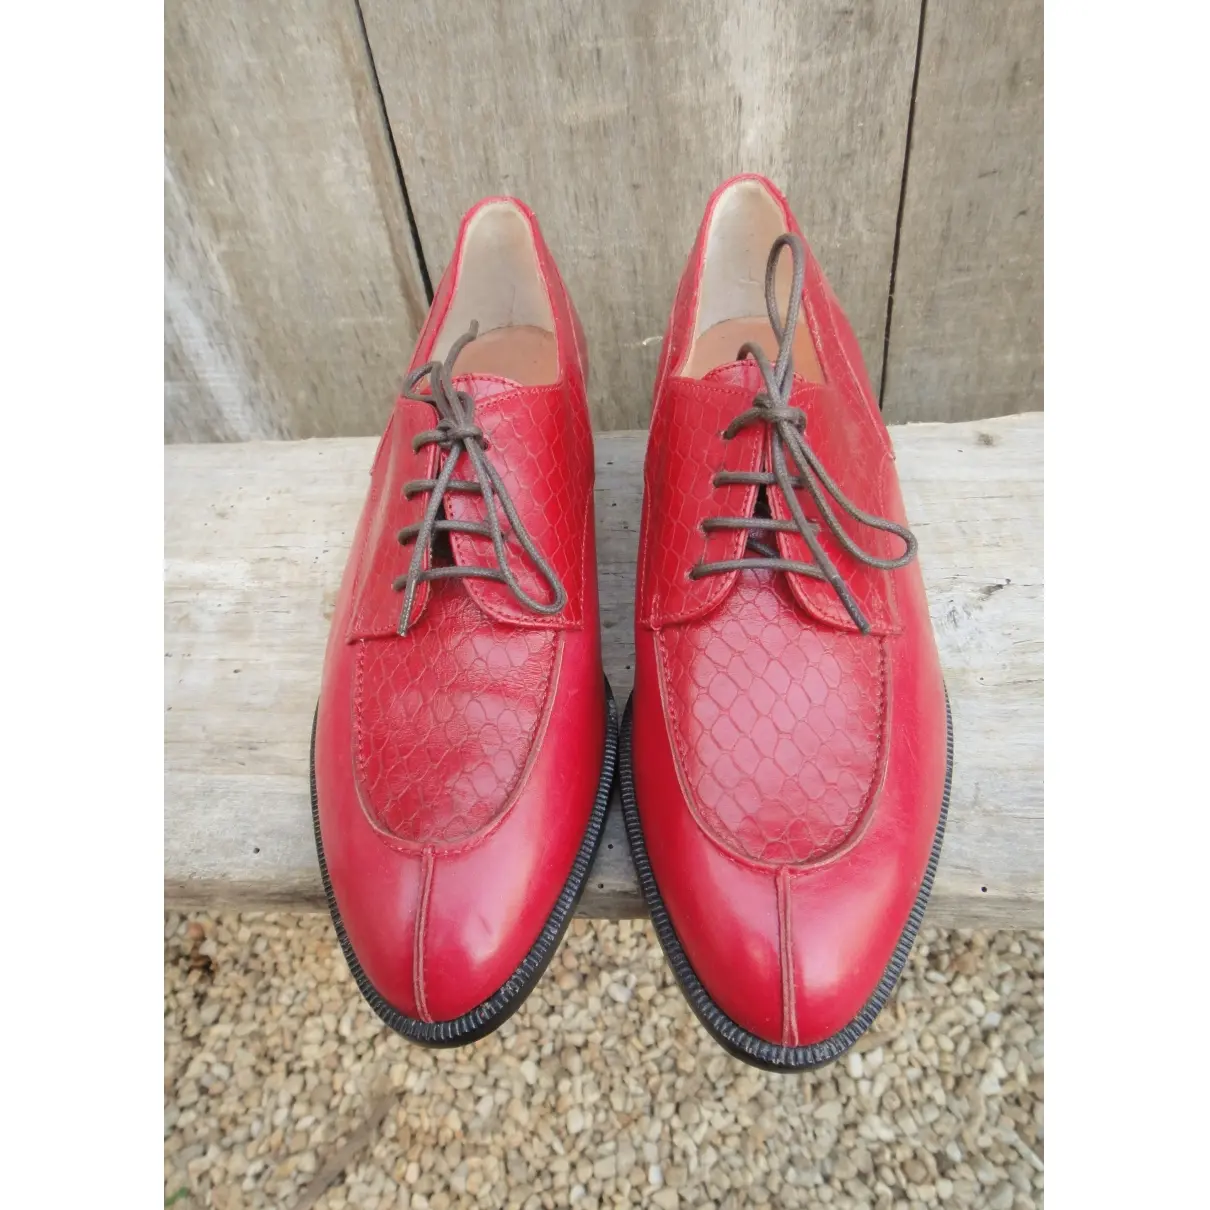 Leather lace ups Robert Clergerie - Vintage